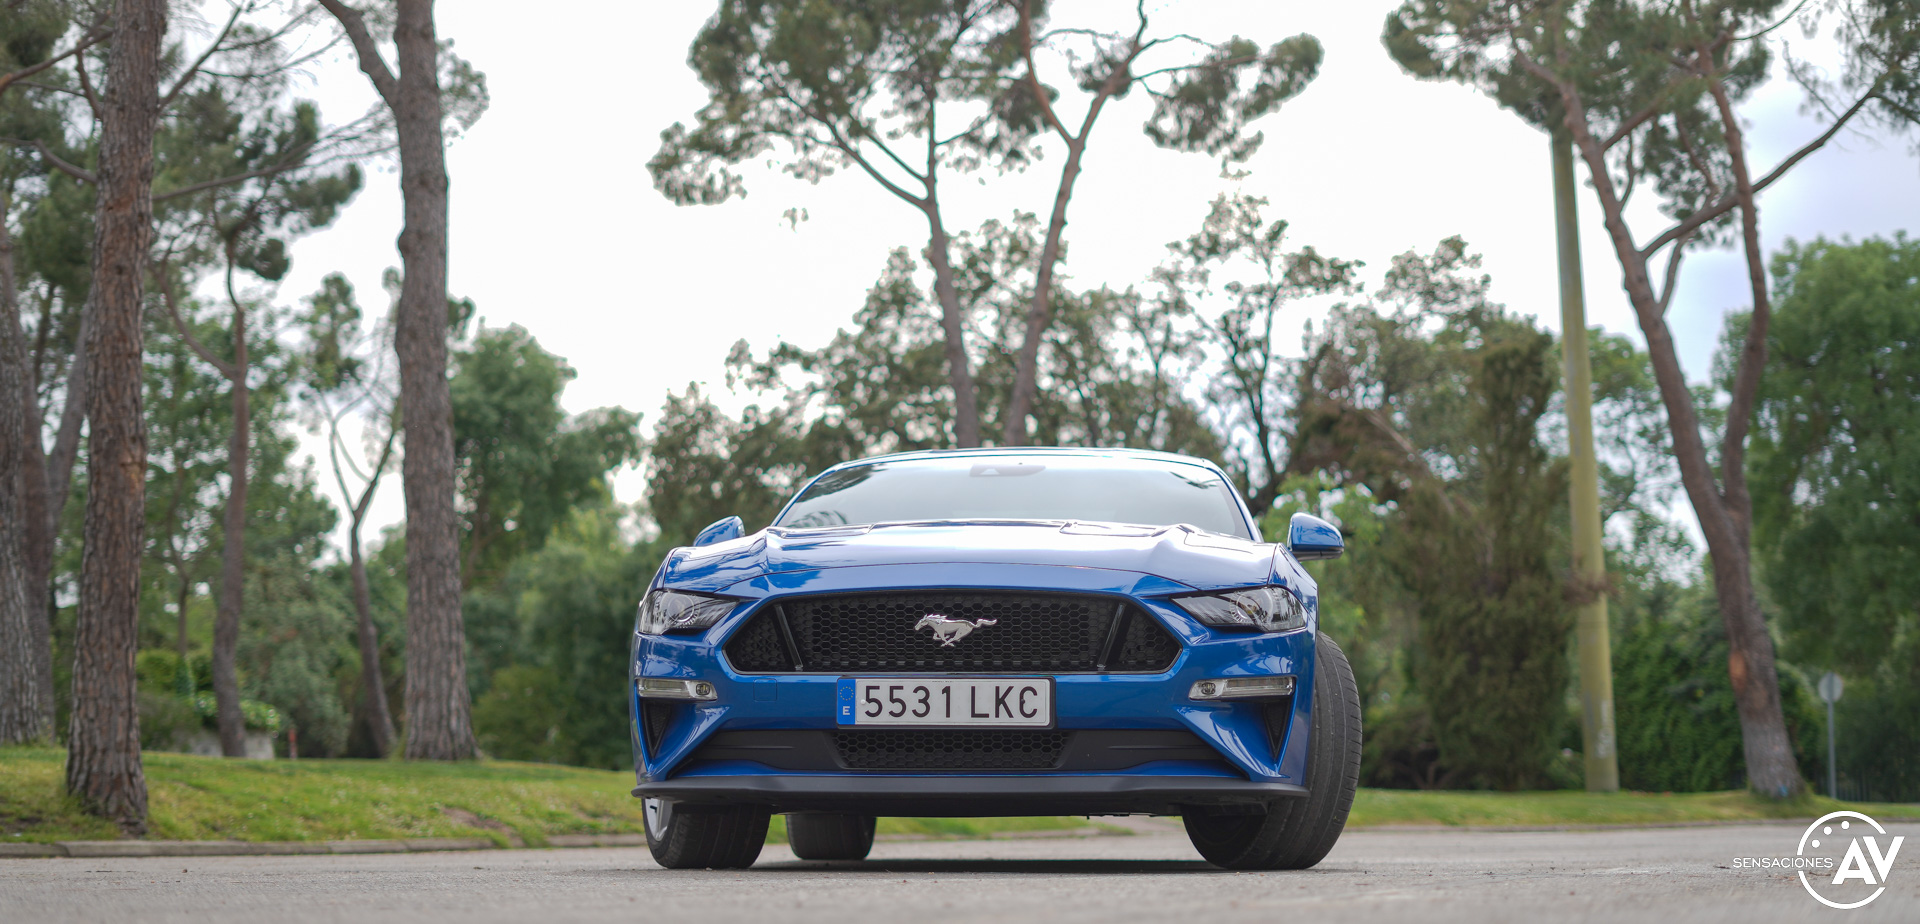 Frontal Ford Mustang - Prueba Ford Mustang GT Fastback 2021: Puro músculo. ¡Que Dios bendiga a América!